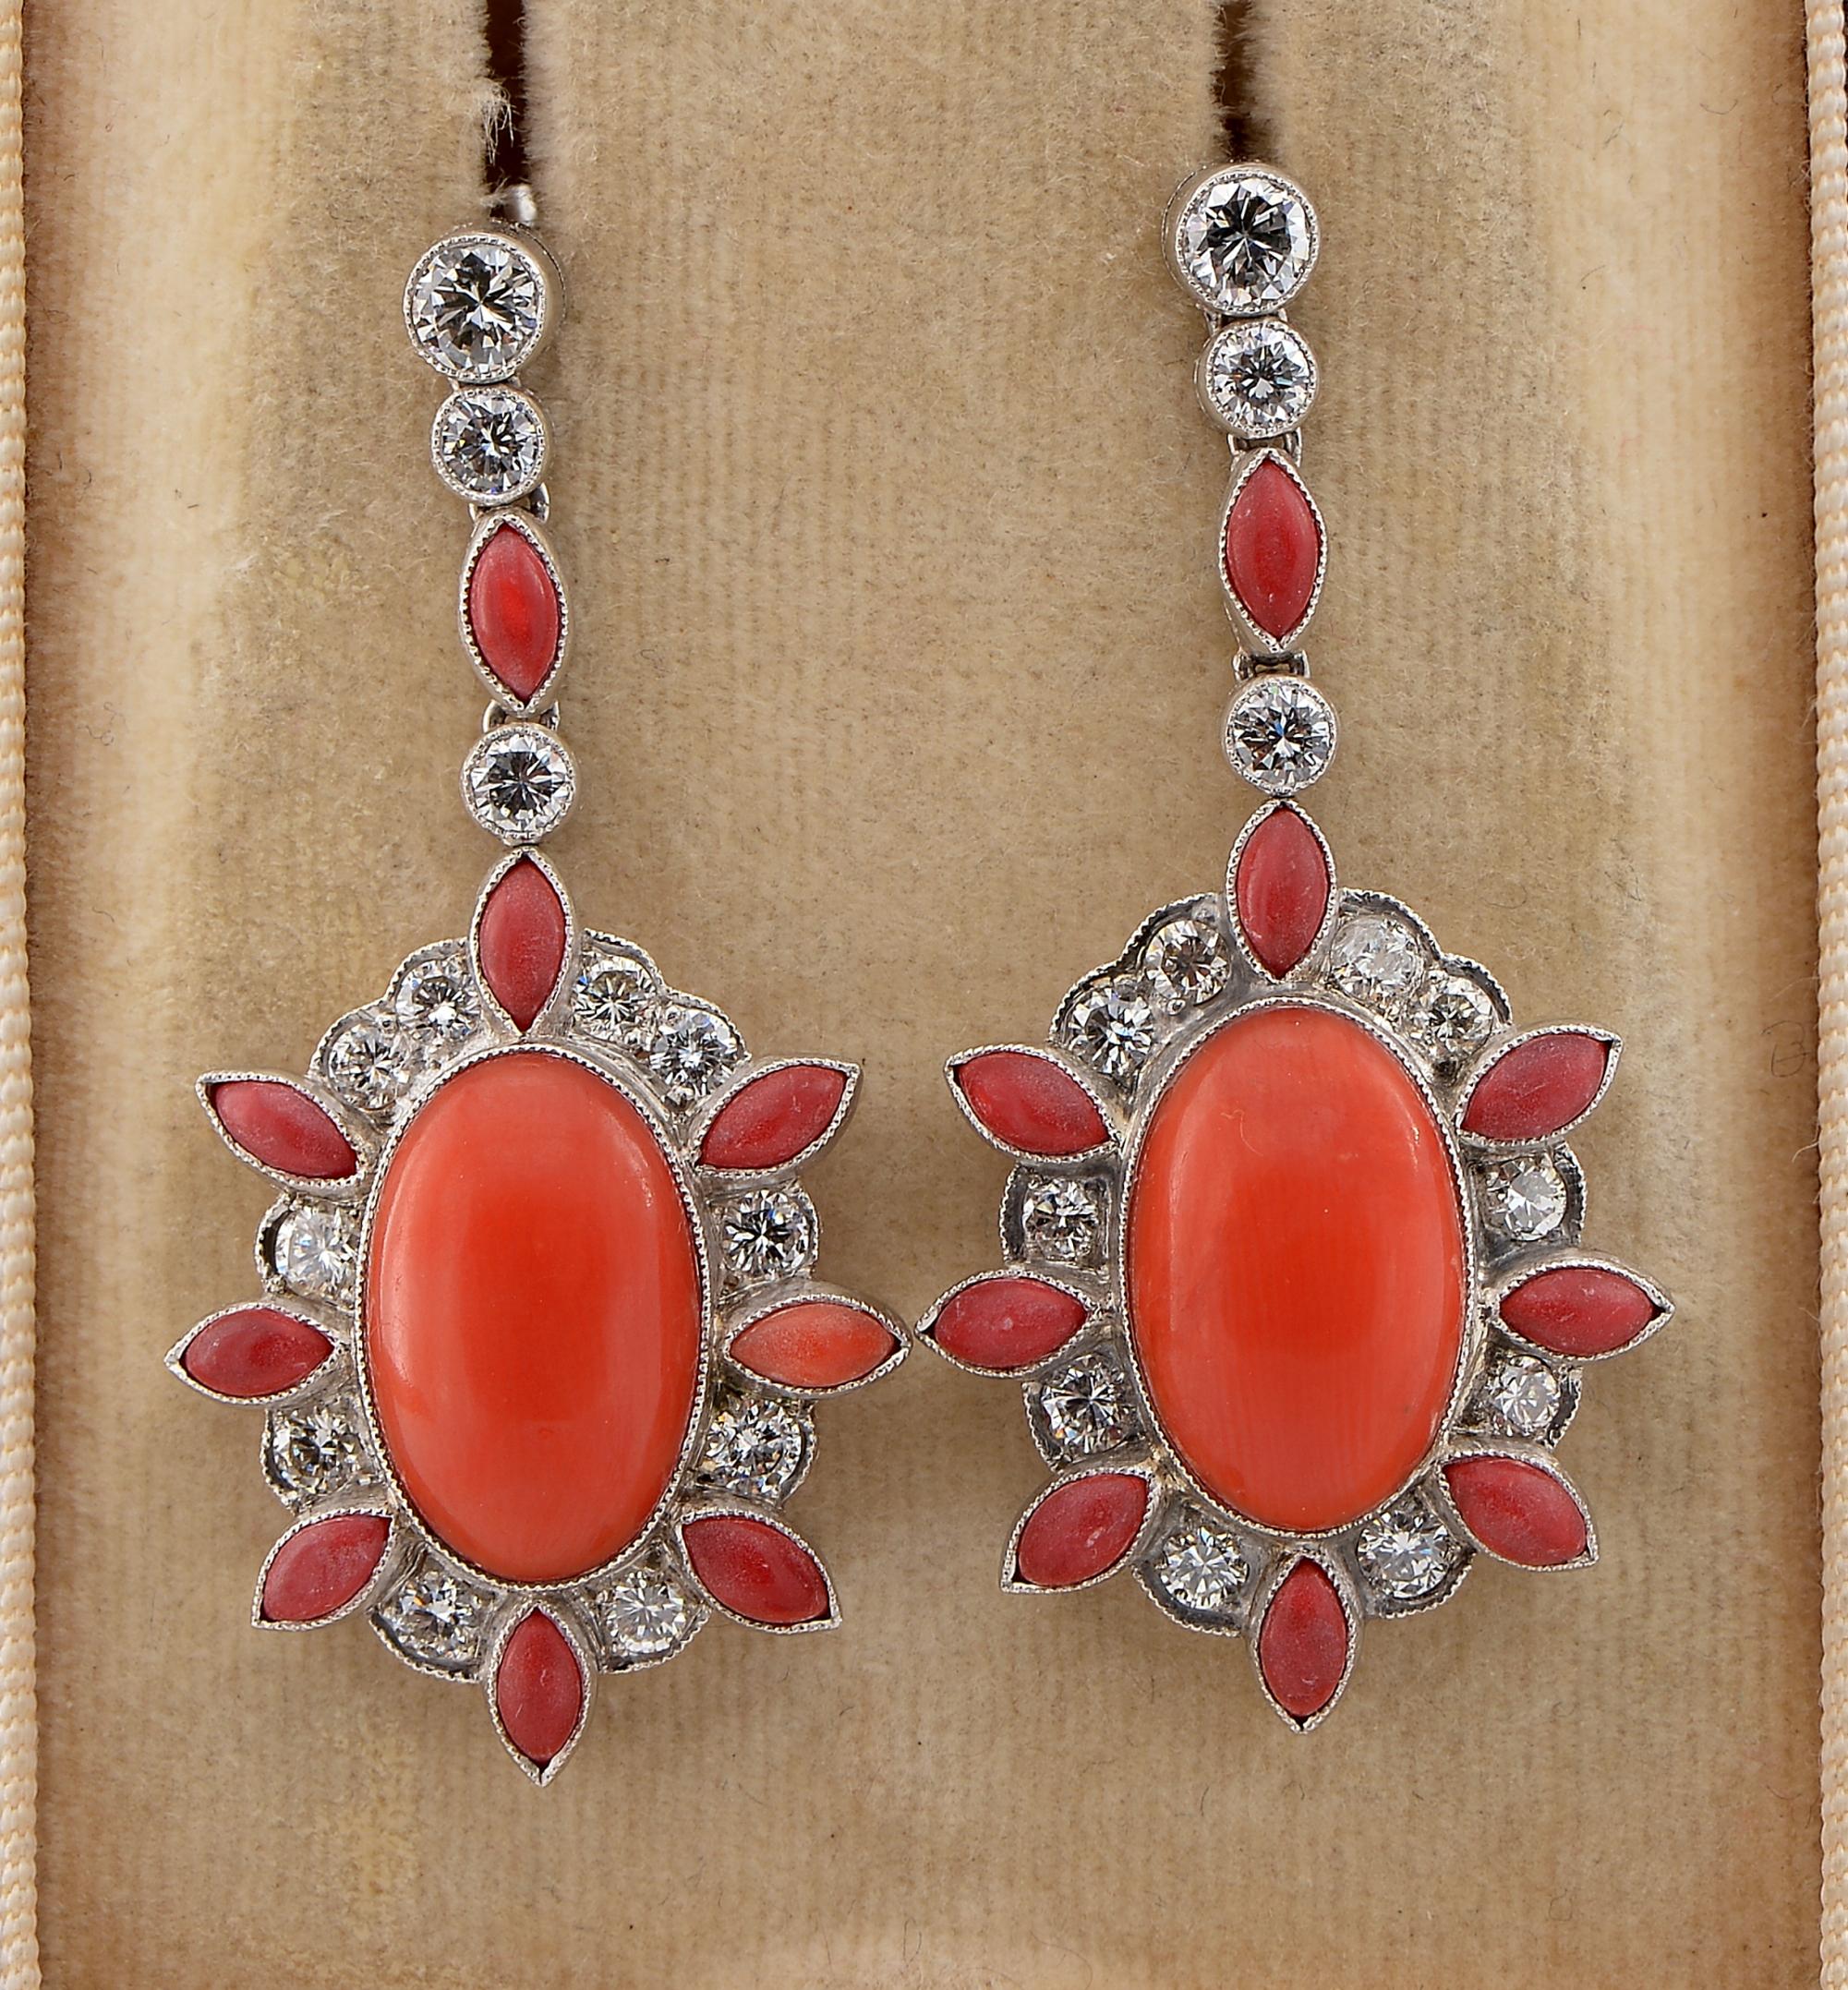 Coral Seduction
Sensual and distinctive this pair of Art Deco period drop earrings, 1925 ca
They have been hand fabricated of solid Platinum, bearing French hallmarks
The striking design artfully combines an eye-catching mix of Natural Red Coral and